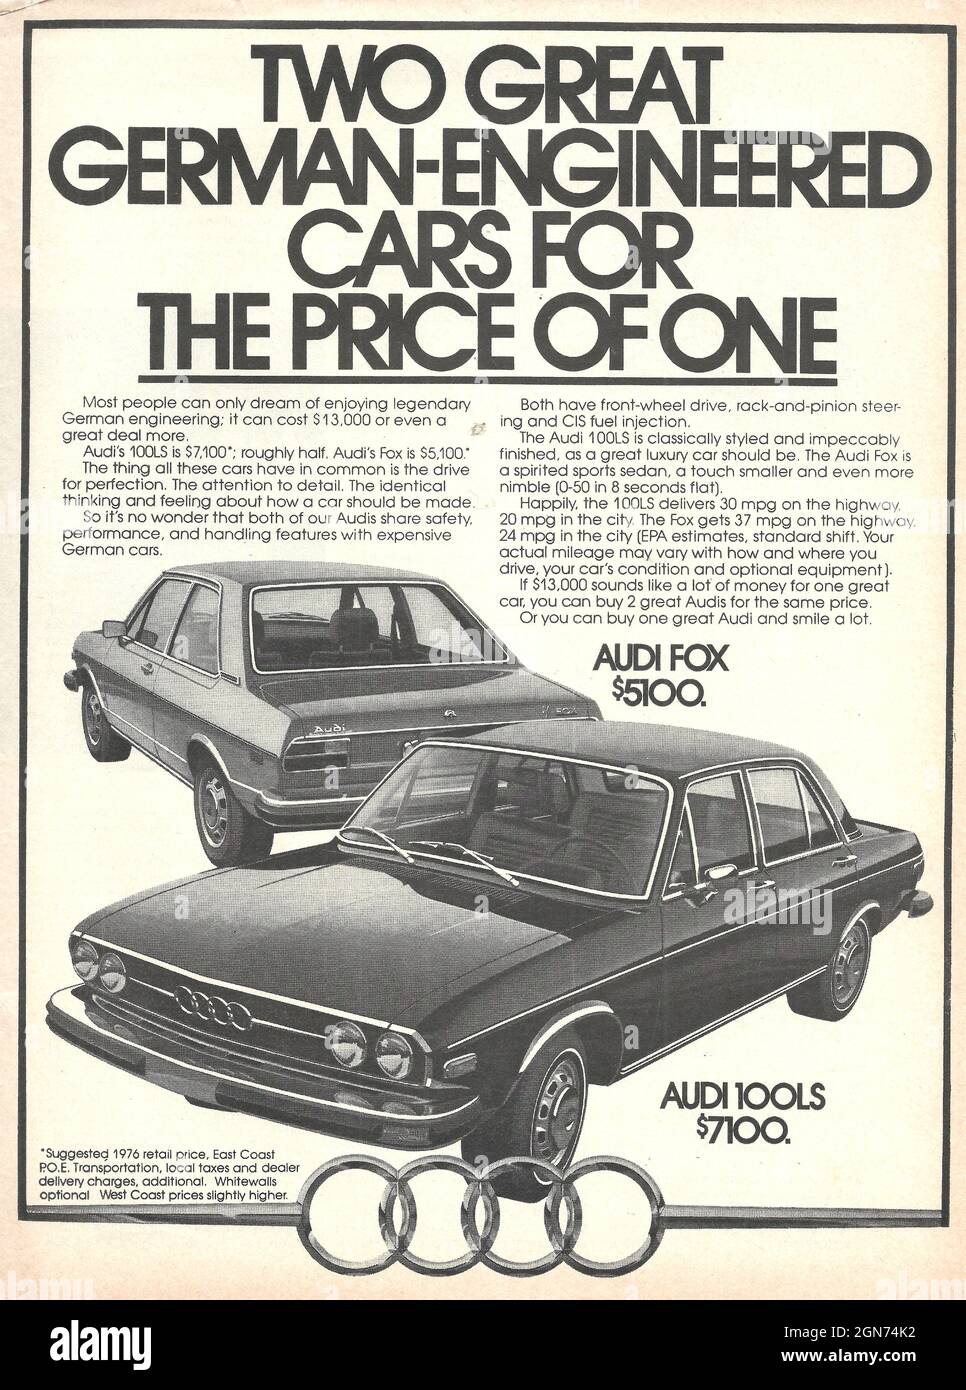 Vintage advertisement of AUDI cars old car 1970s 1980s Stock Photo